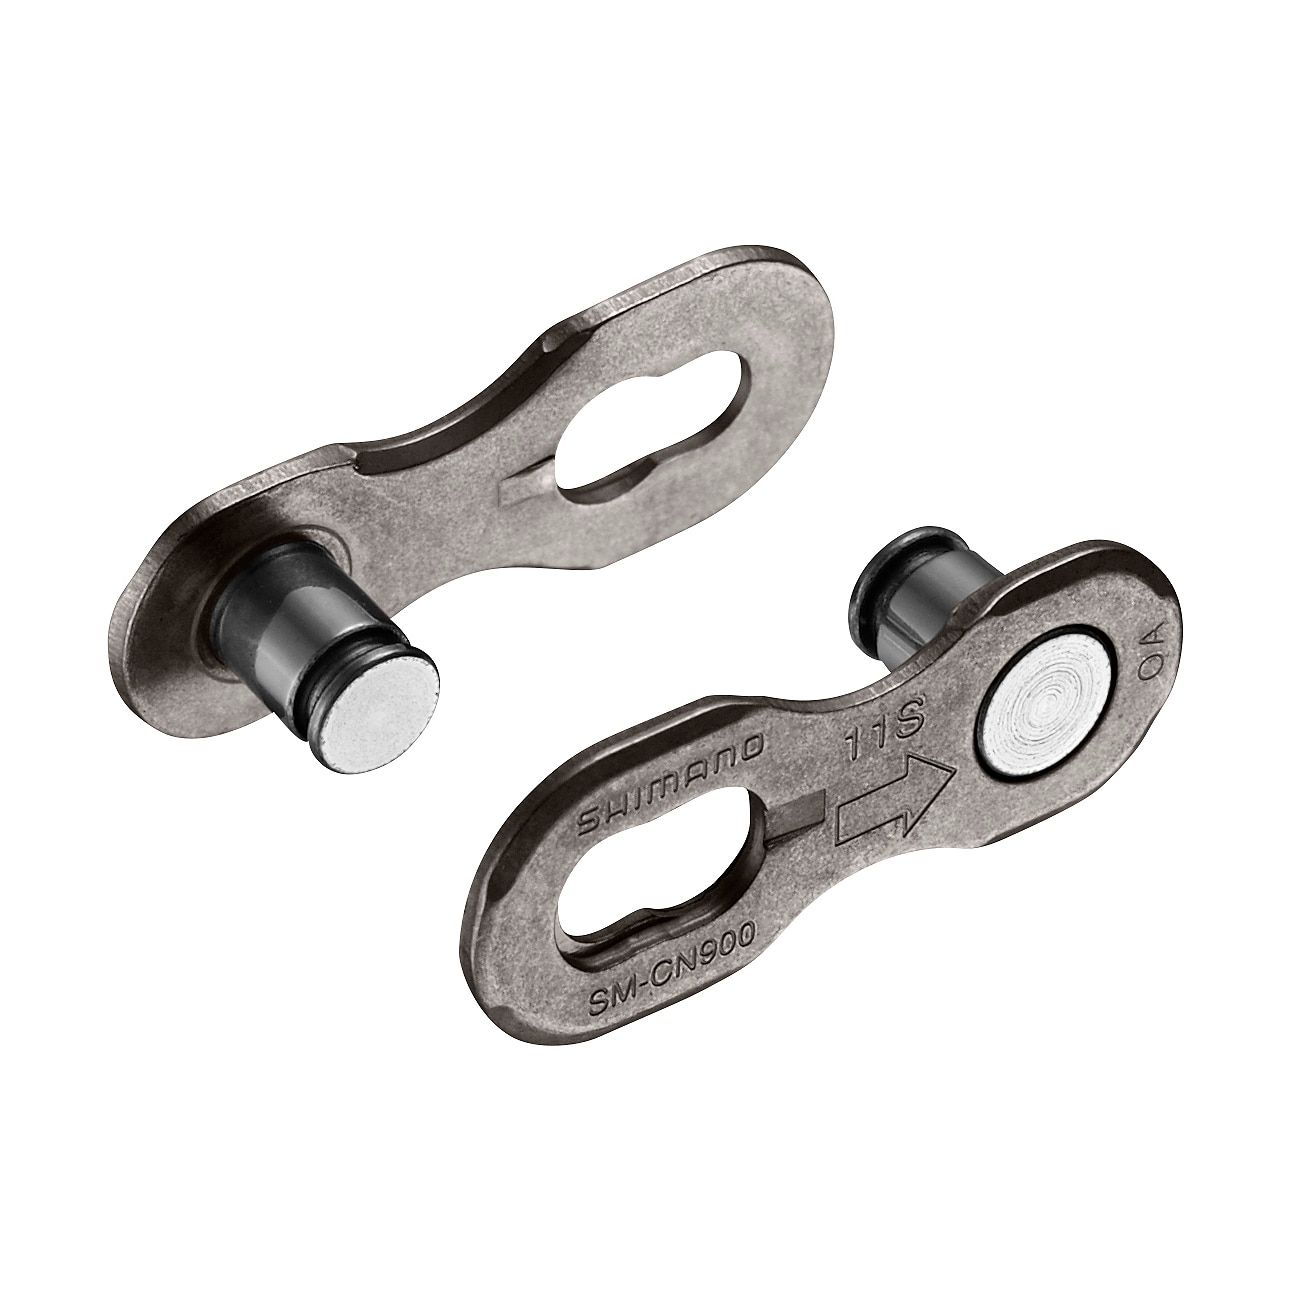 Details about   Connect Link Bicycle Chain Button Quick Missing Buckle Variable Speed Bike 6-12s 